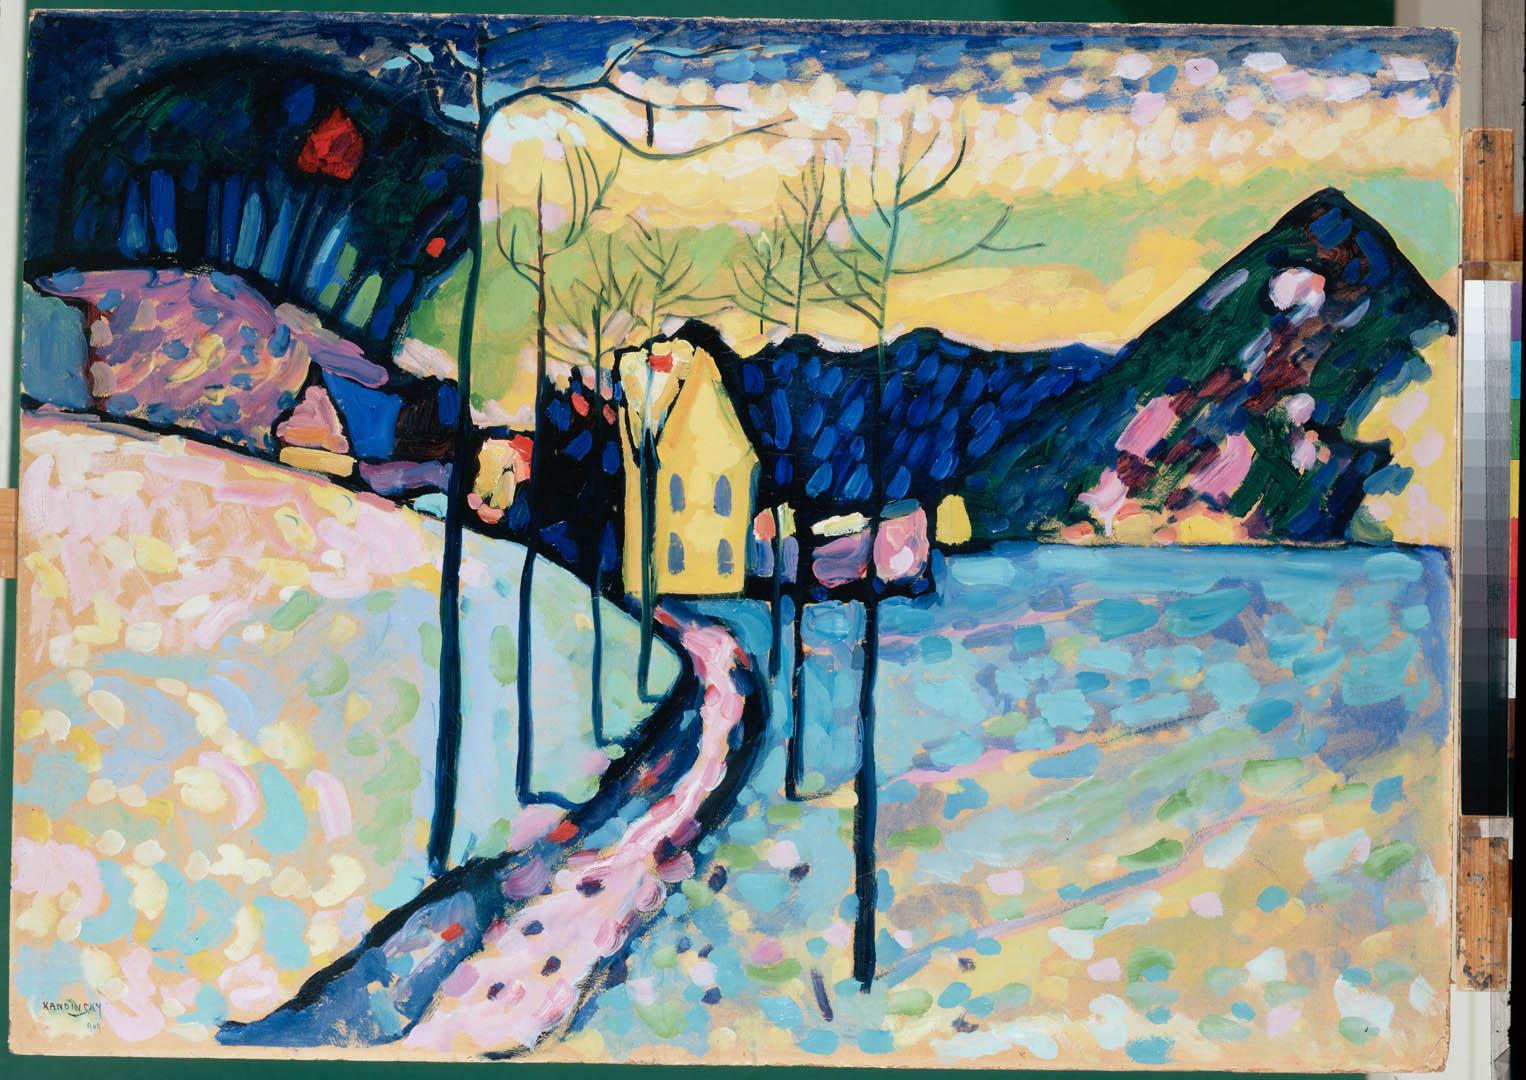 Free download Landscape A expressionist wassily kandinsky